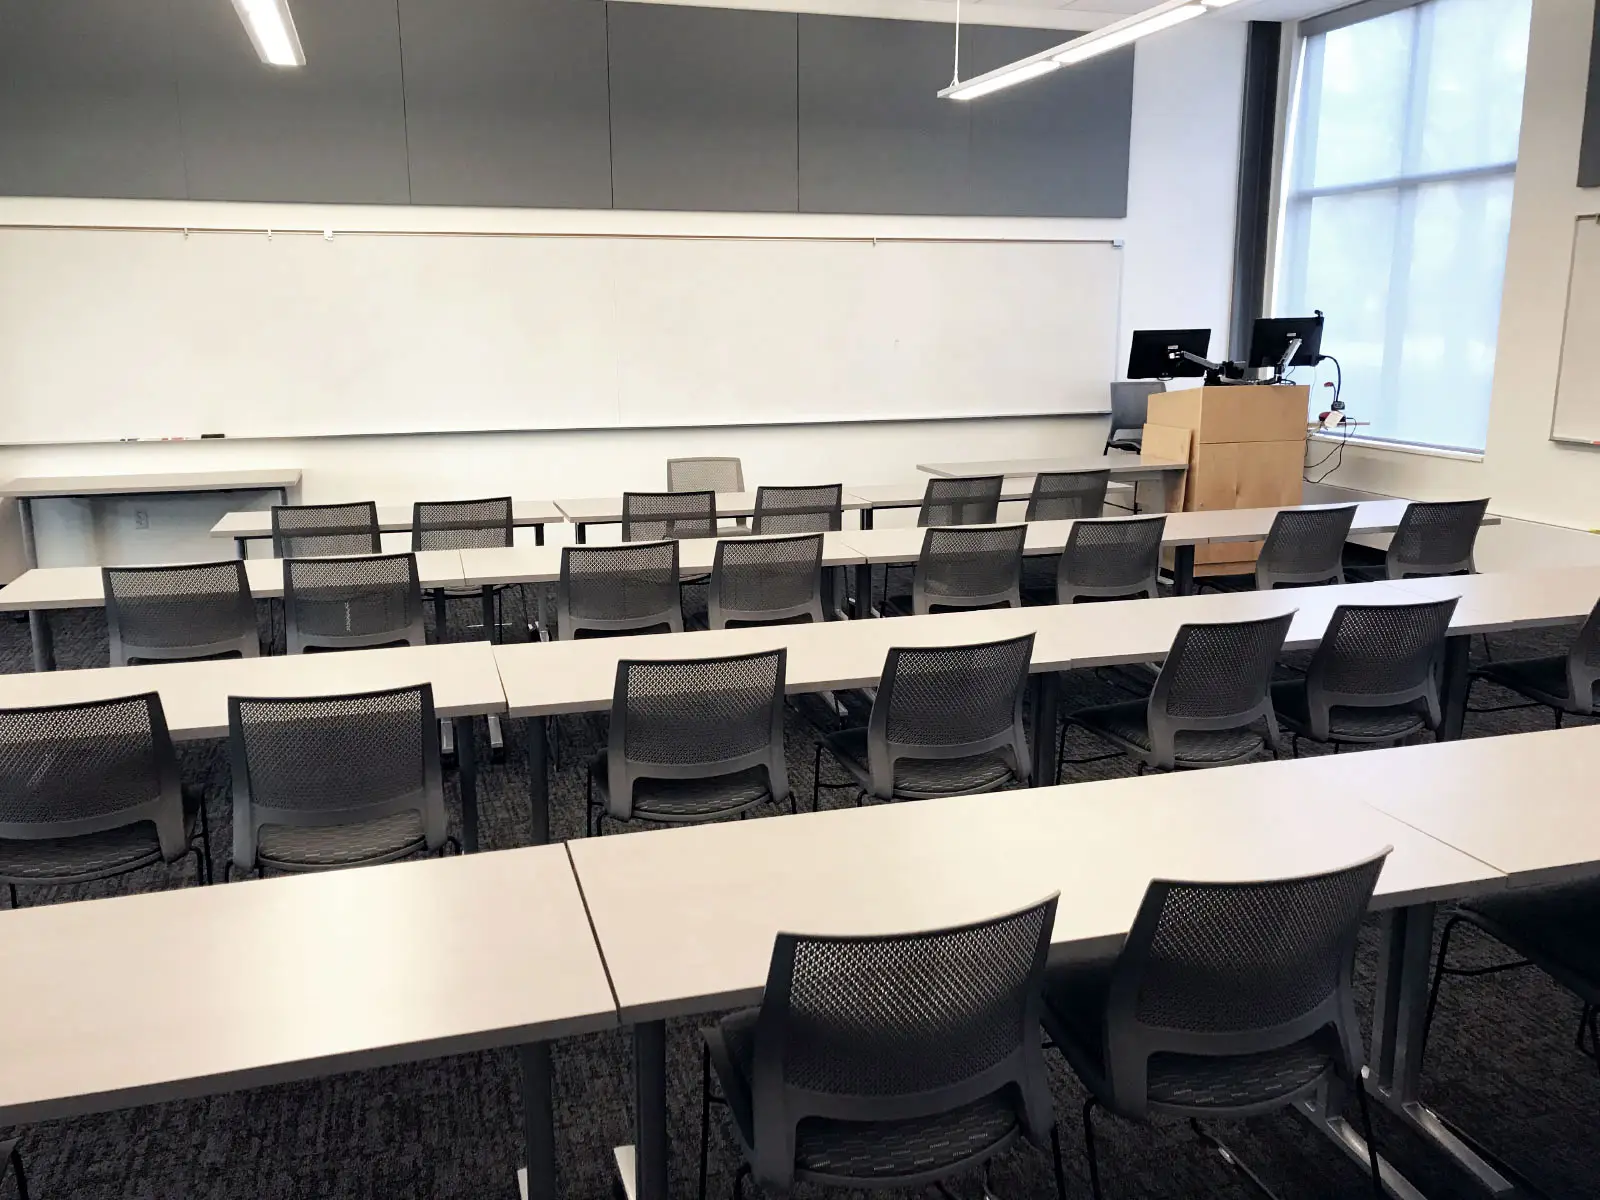 Rows of chairs and tables with a podium in front of a whiteboard in Harmony Campus classroom